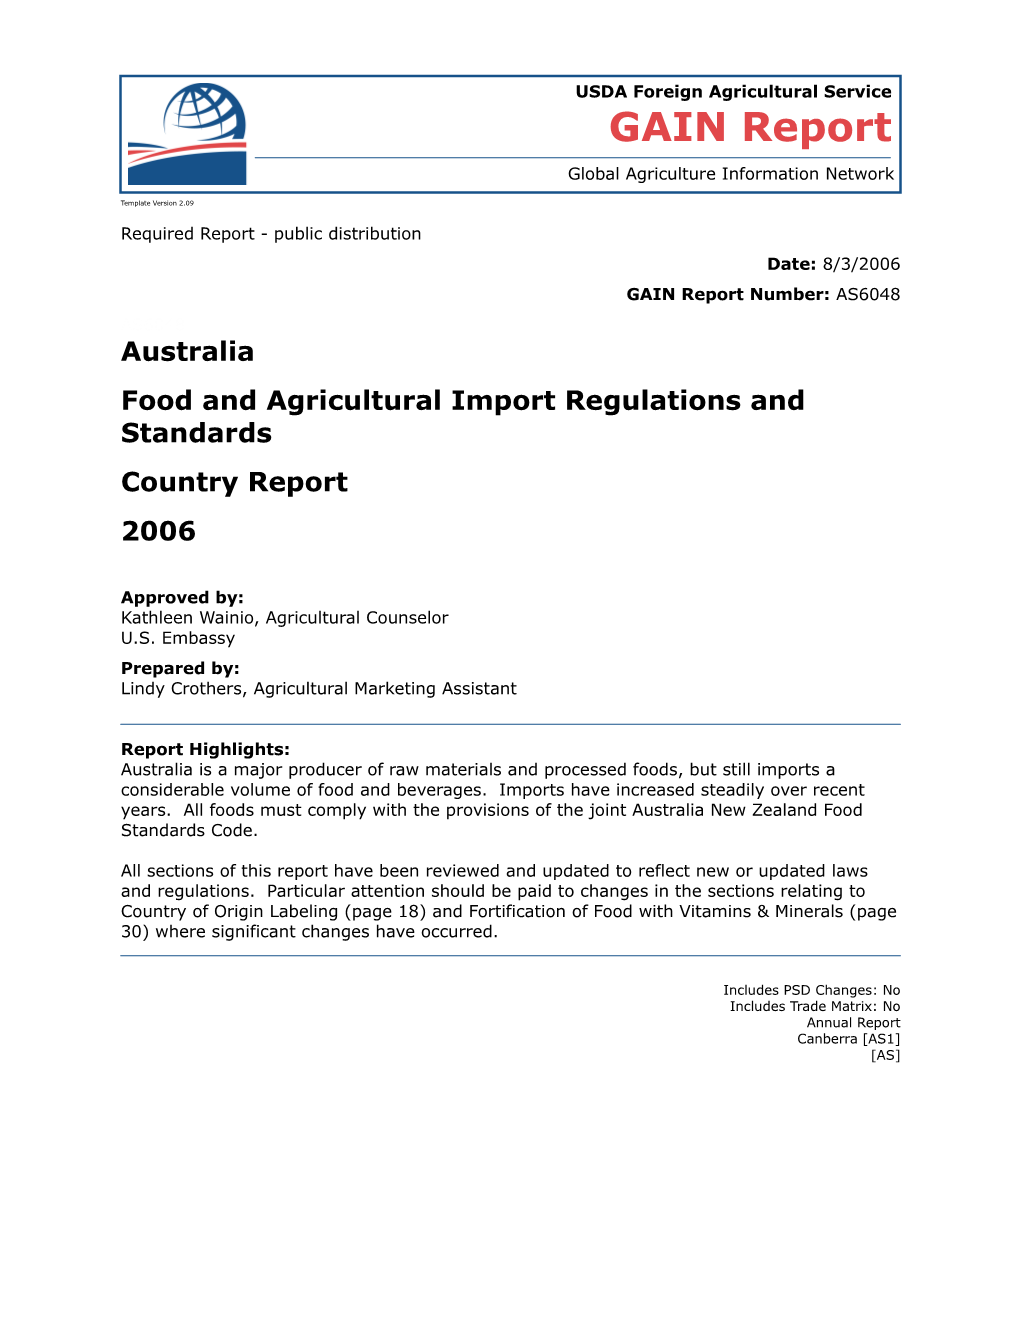 Food and Agricultural Import Regulations and Standards s13